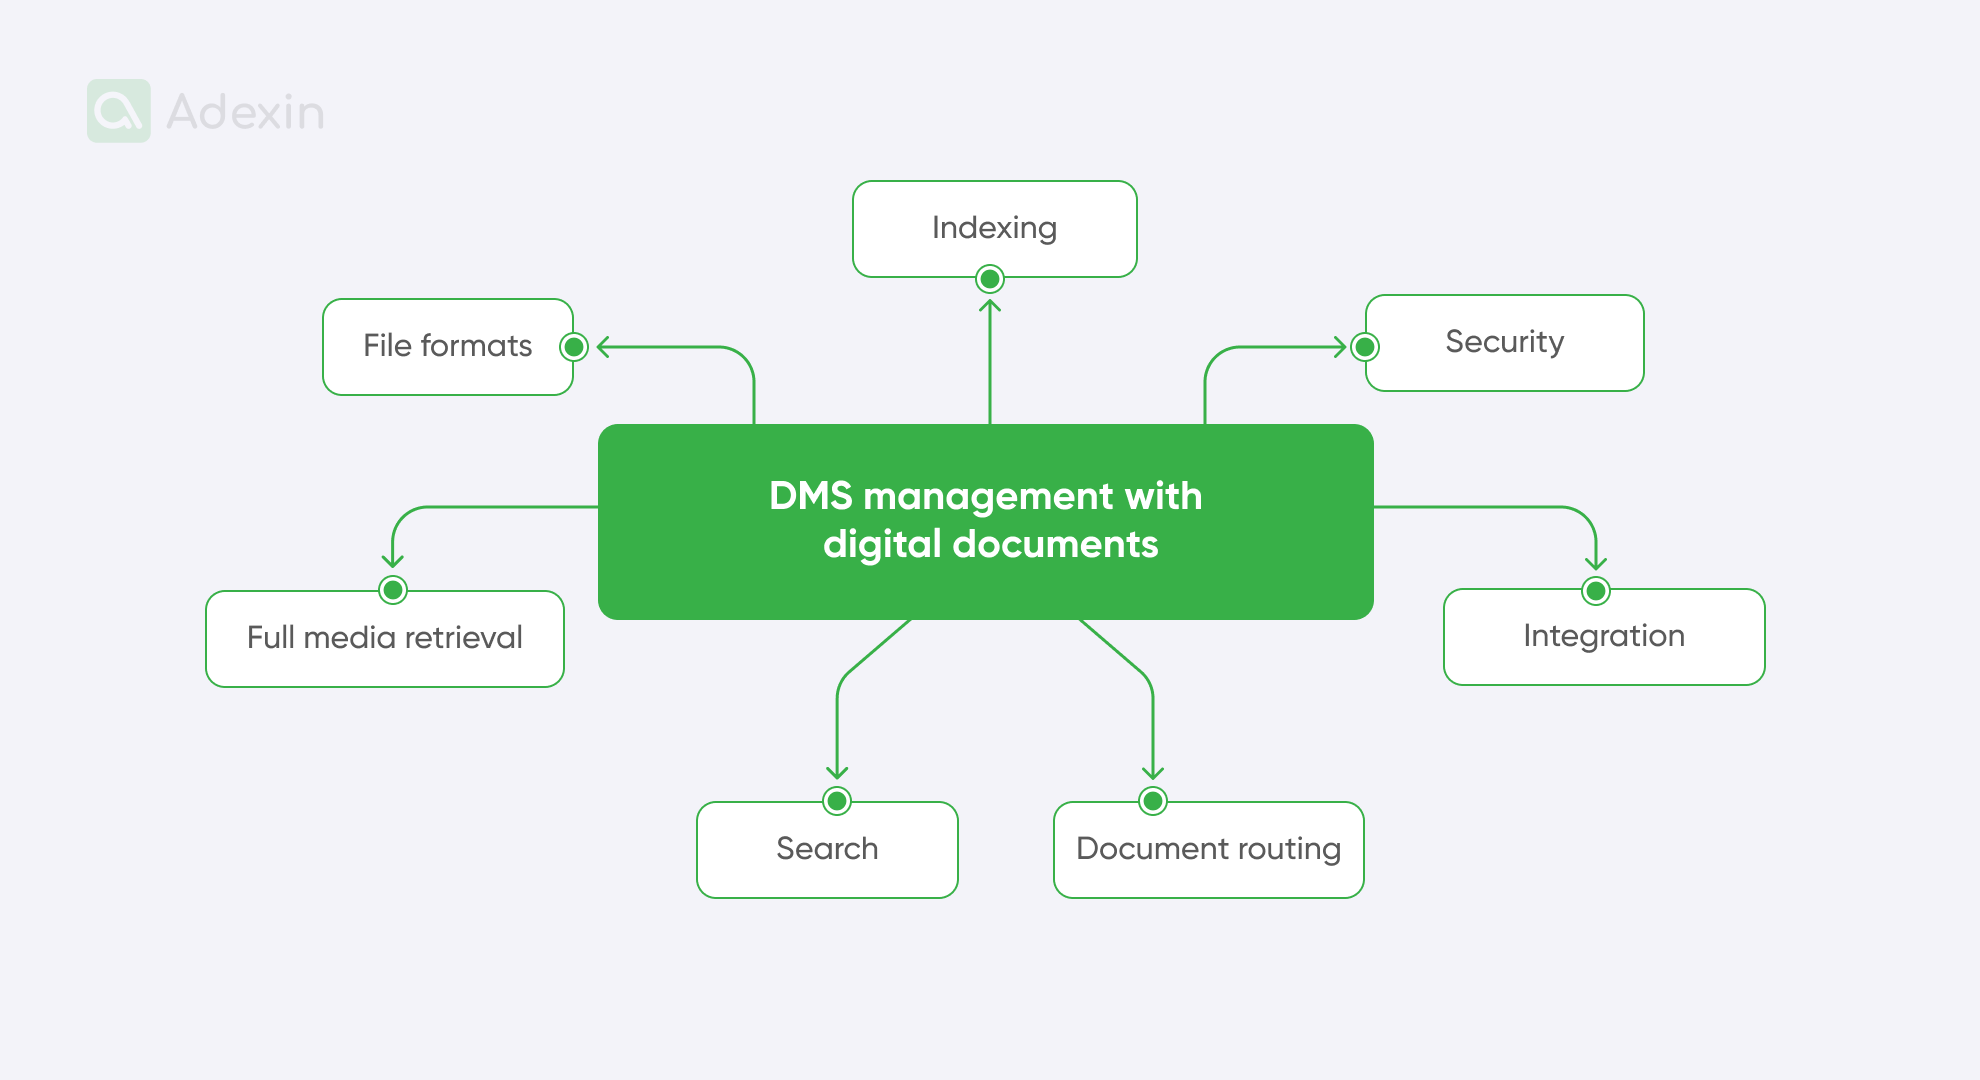 Elements of DMS management with digital documents